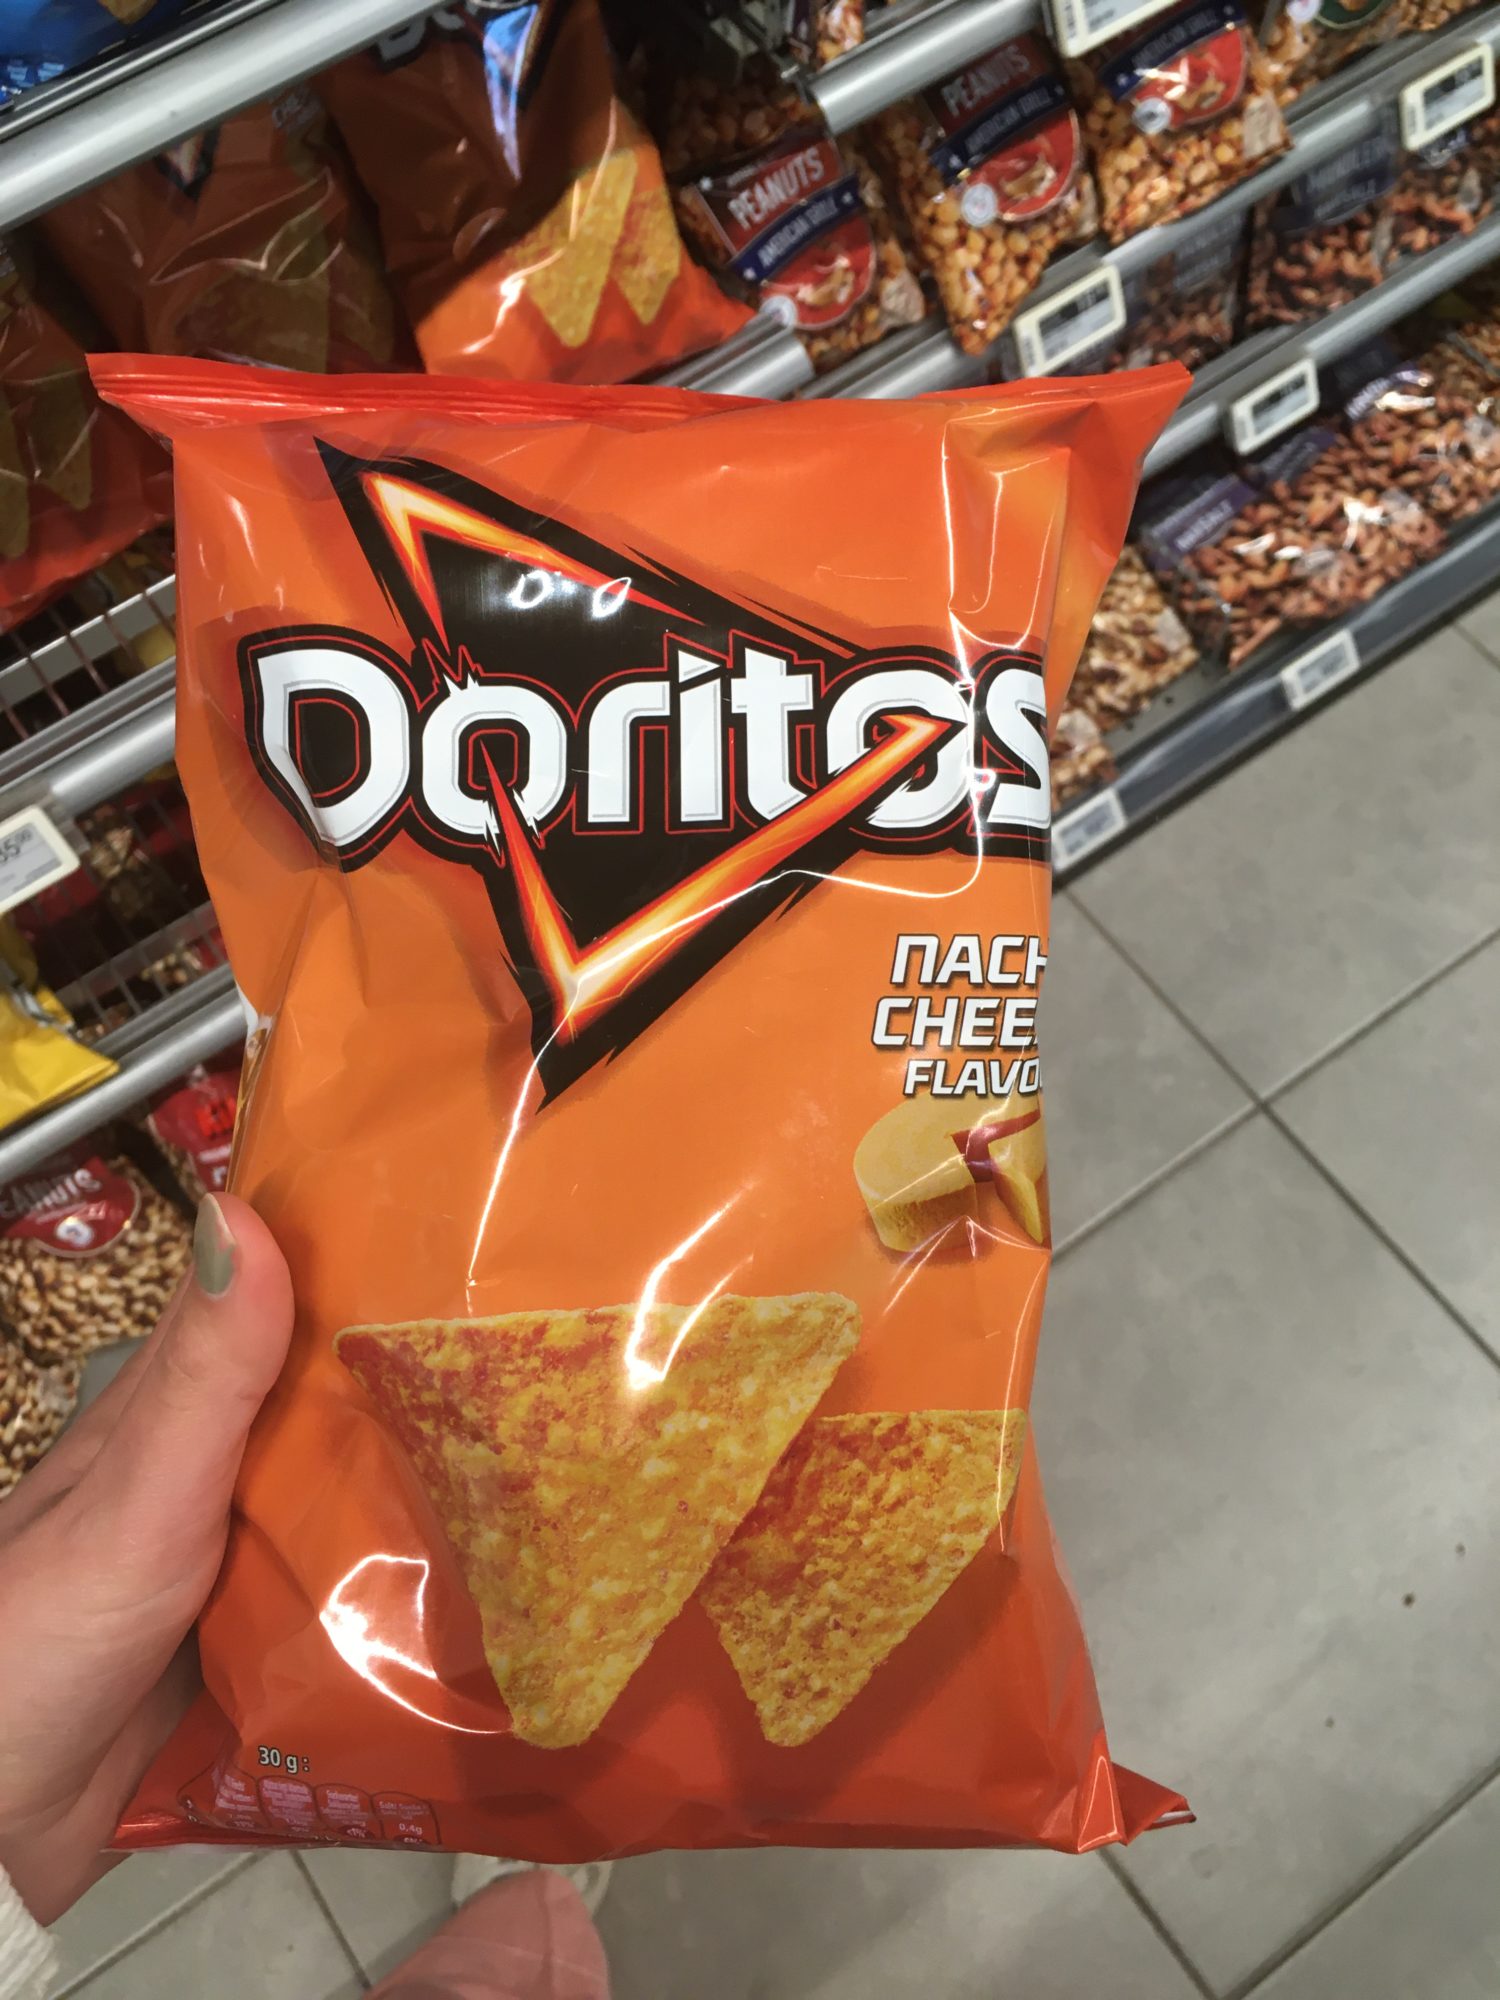 Doritos - Nacho Cheese Flavour (last validated: Oct 2021) - Fight Dual Food